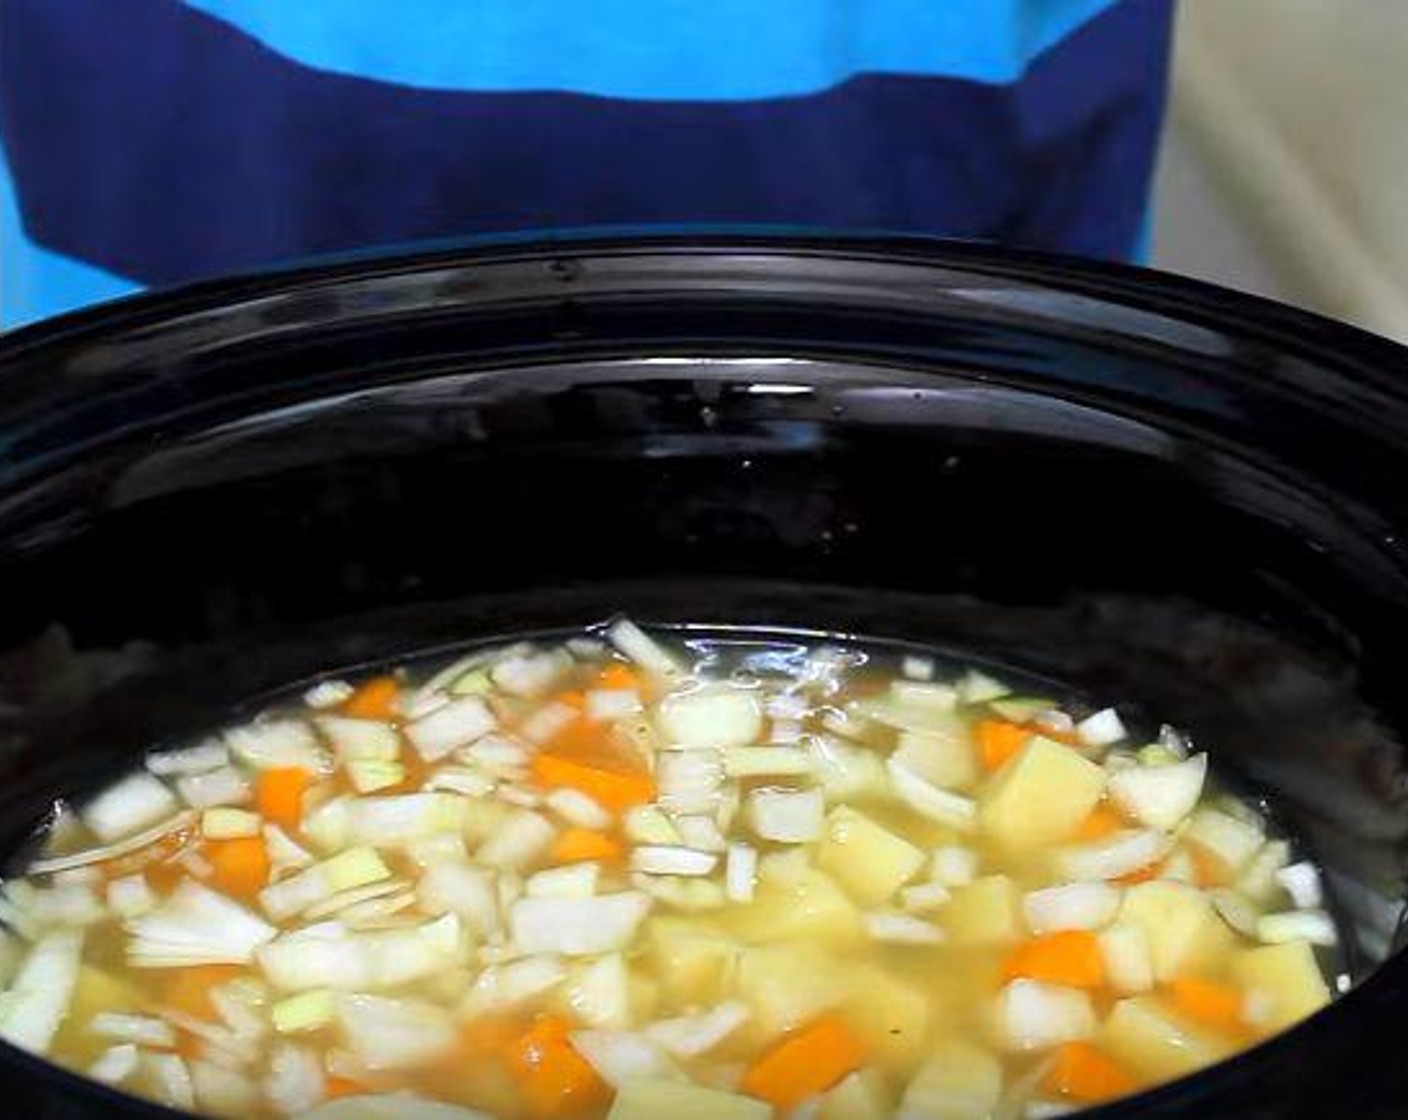 step 1 Place Potatoes (2 lb), Carrot (1), Onion (1), Chicken Broth (3 cups) and Salt (to taste). Cover, cook on LOW 6 to 7 hours or on HIGH 3 to 3-1/2 hours or until vegetables are tender/soft.